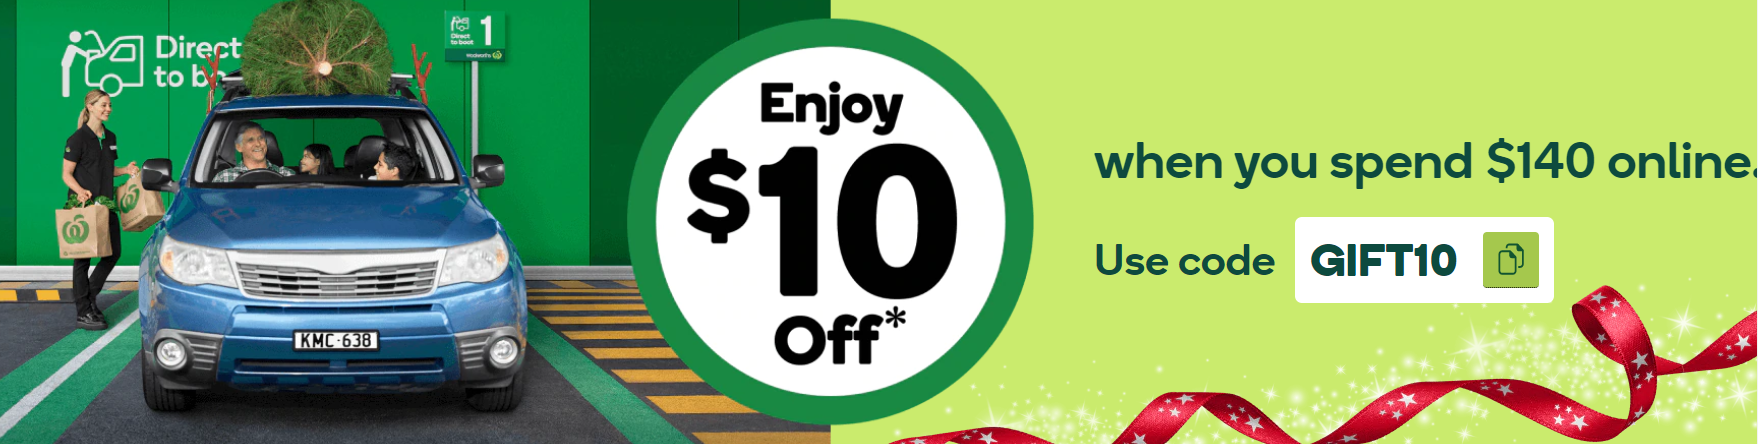 Extra $10 OFF when you spend $140+ with promo code @ Woolworths